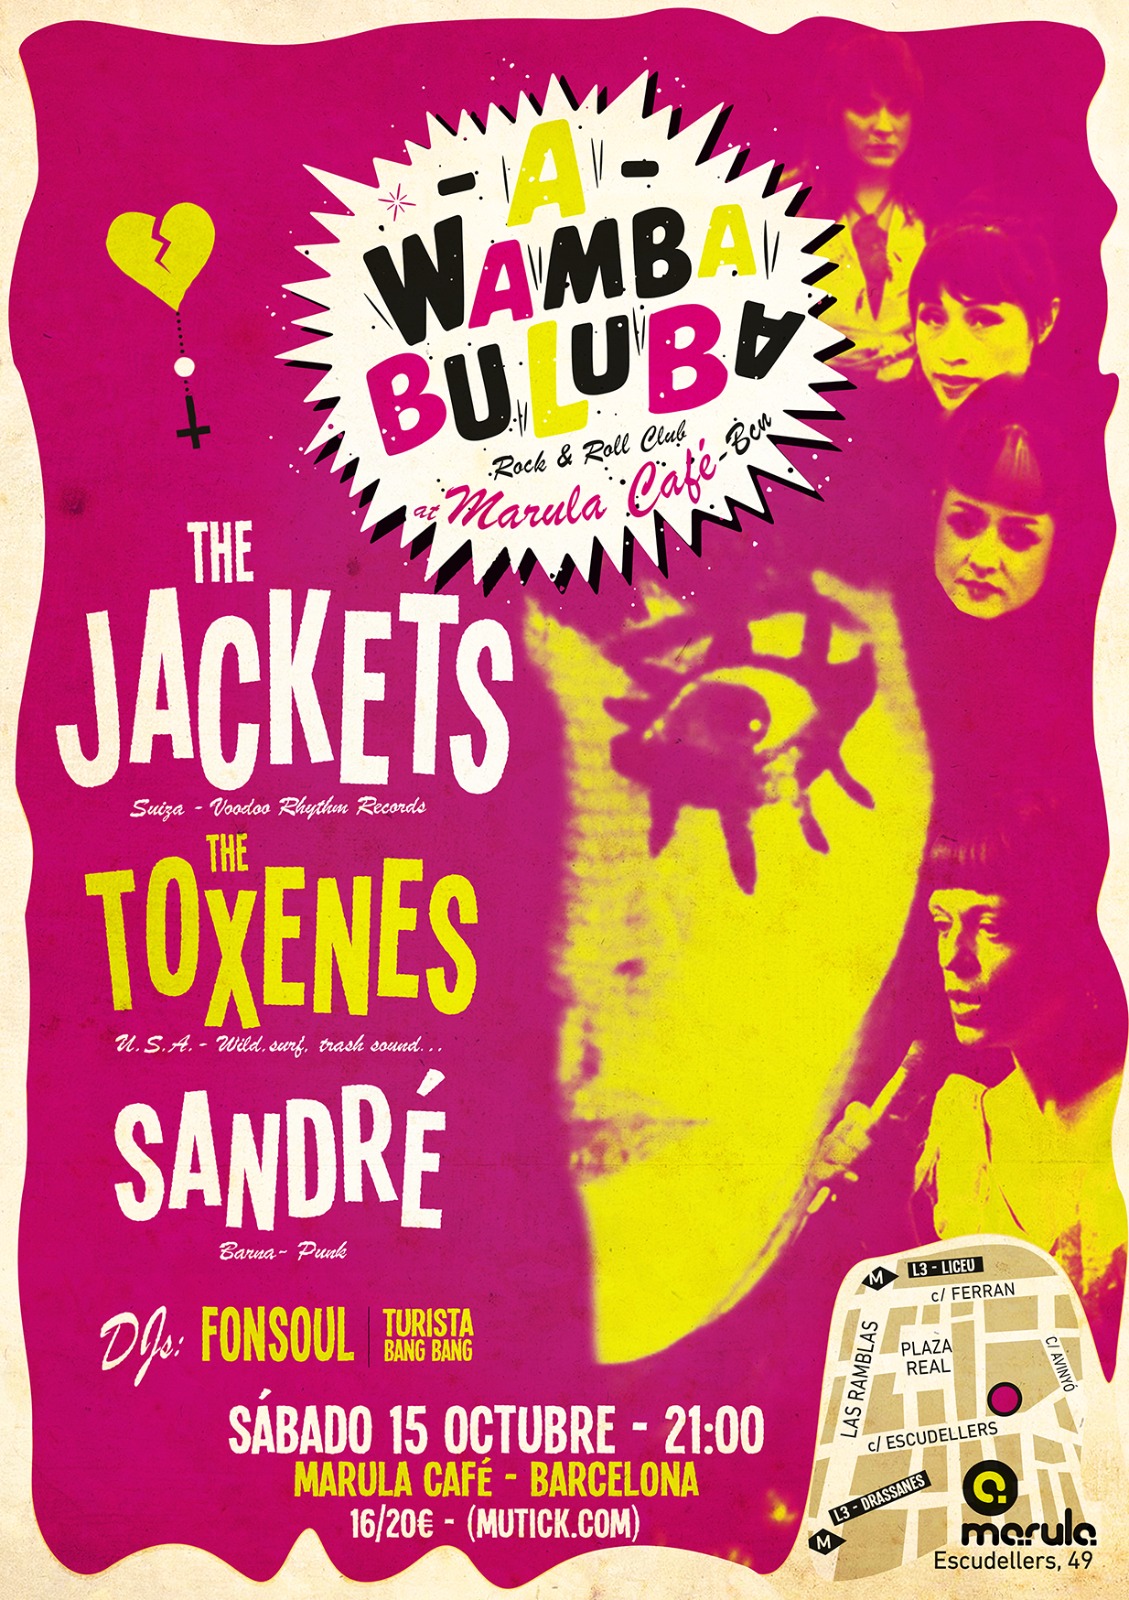 The Jackets (Suiza) + The Toxenes (USA) en Barcelona - Mutick